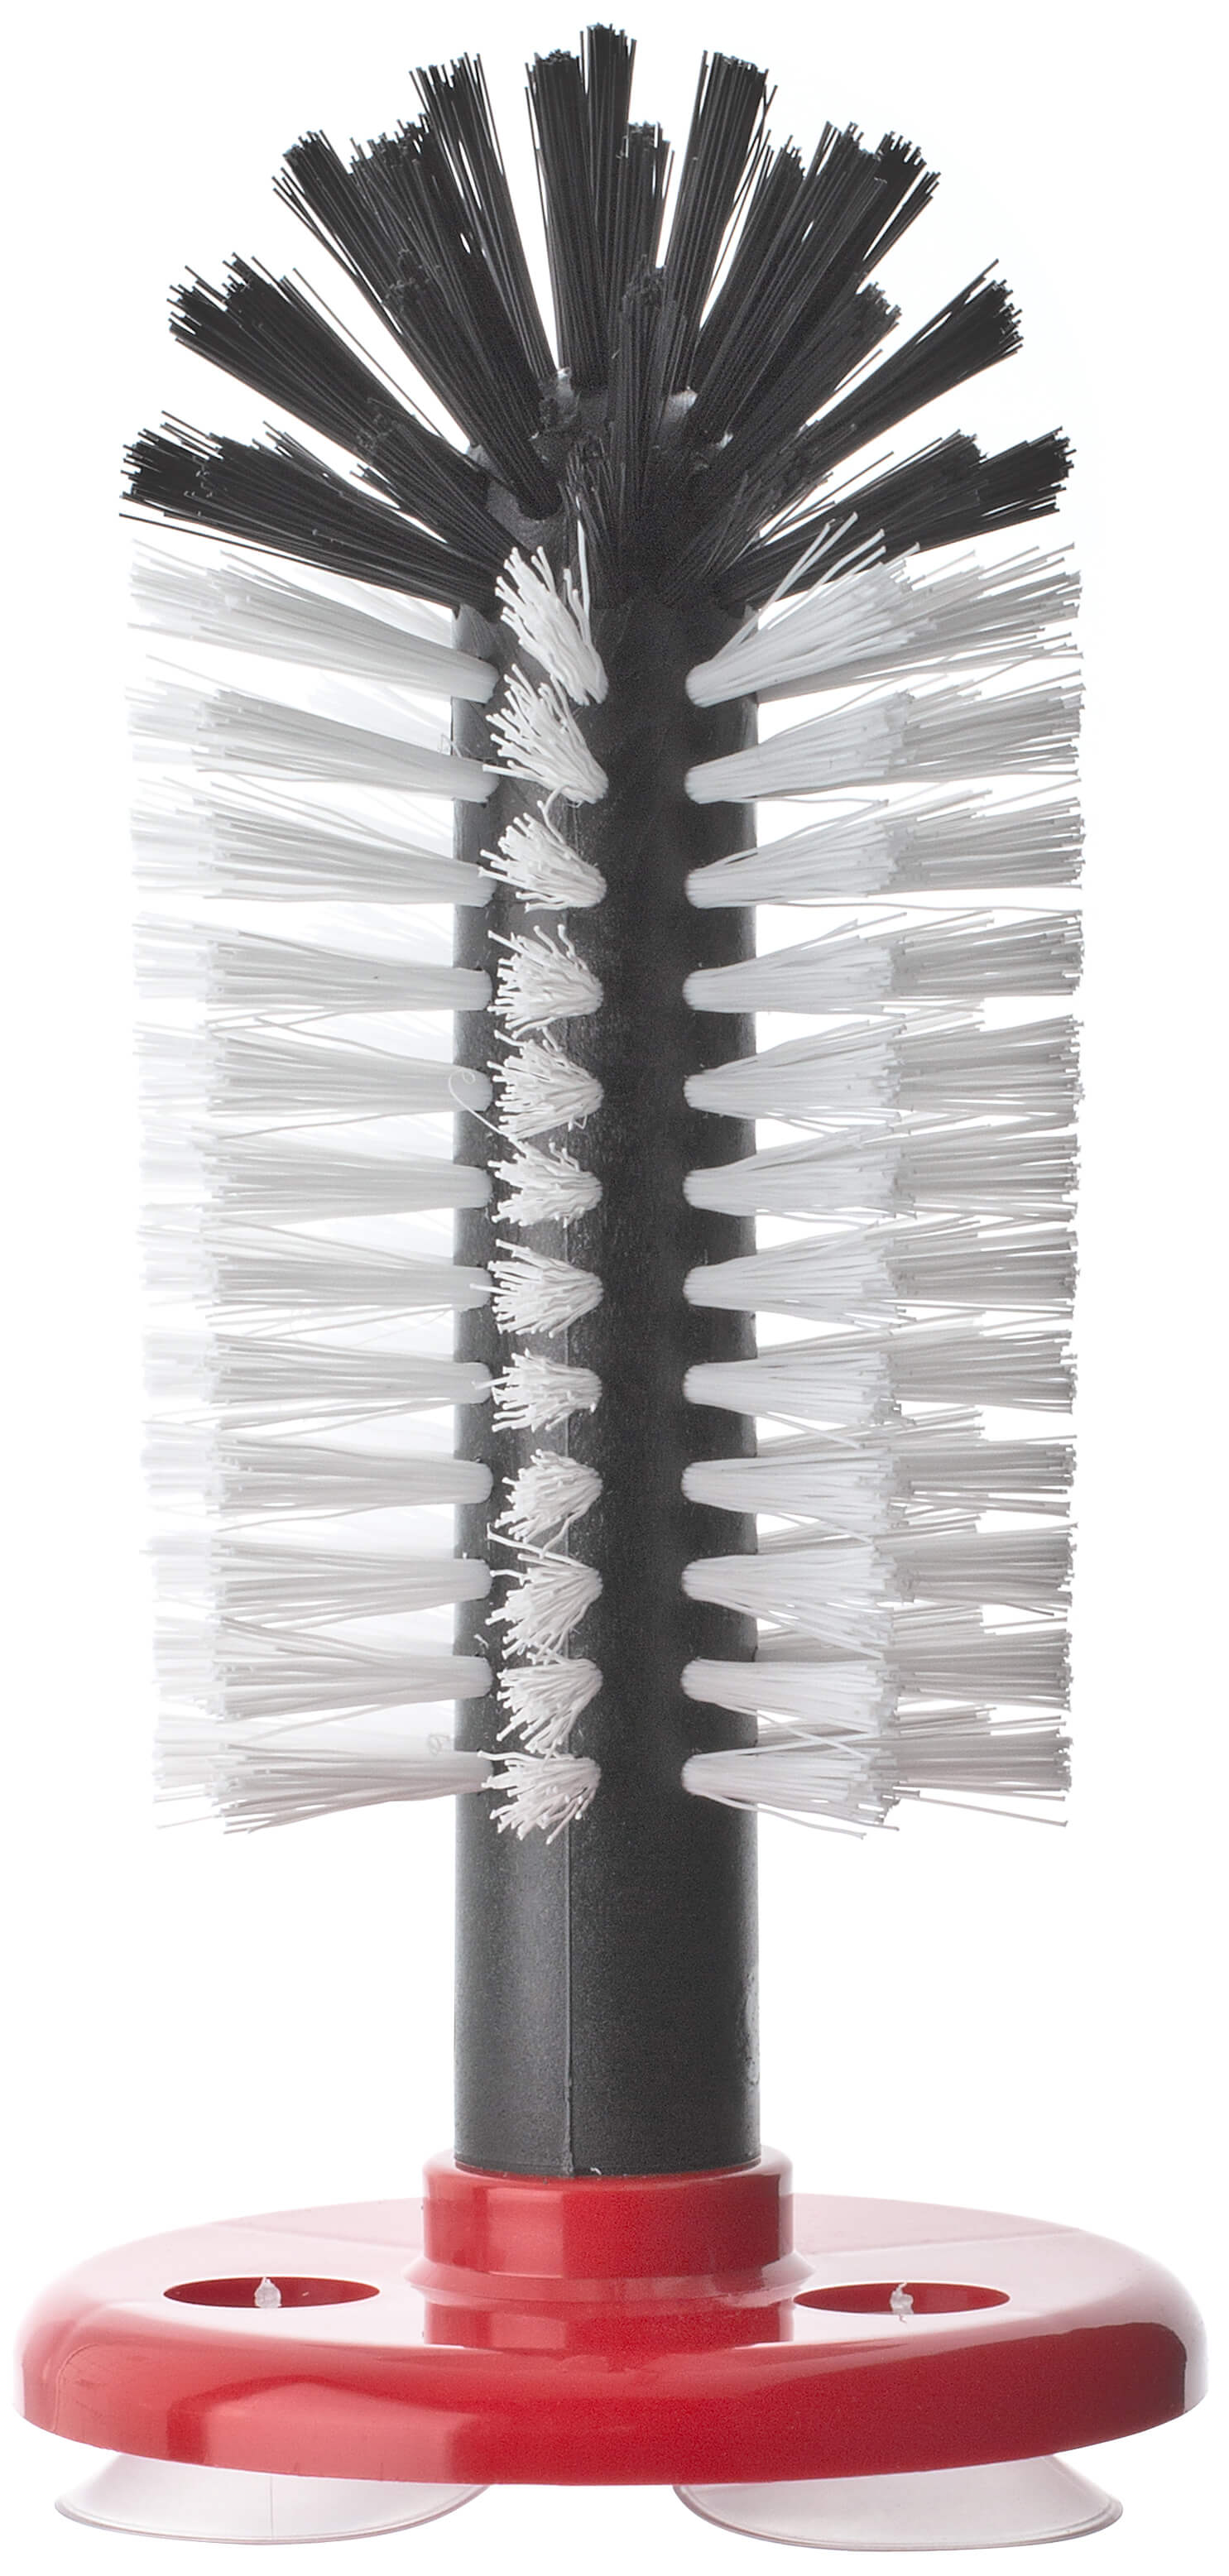 Glass cleaning brush - 1-piece